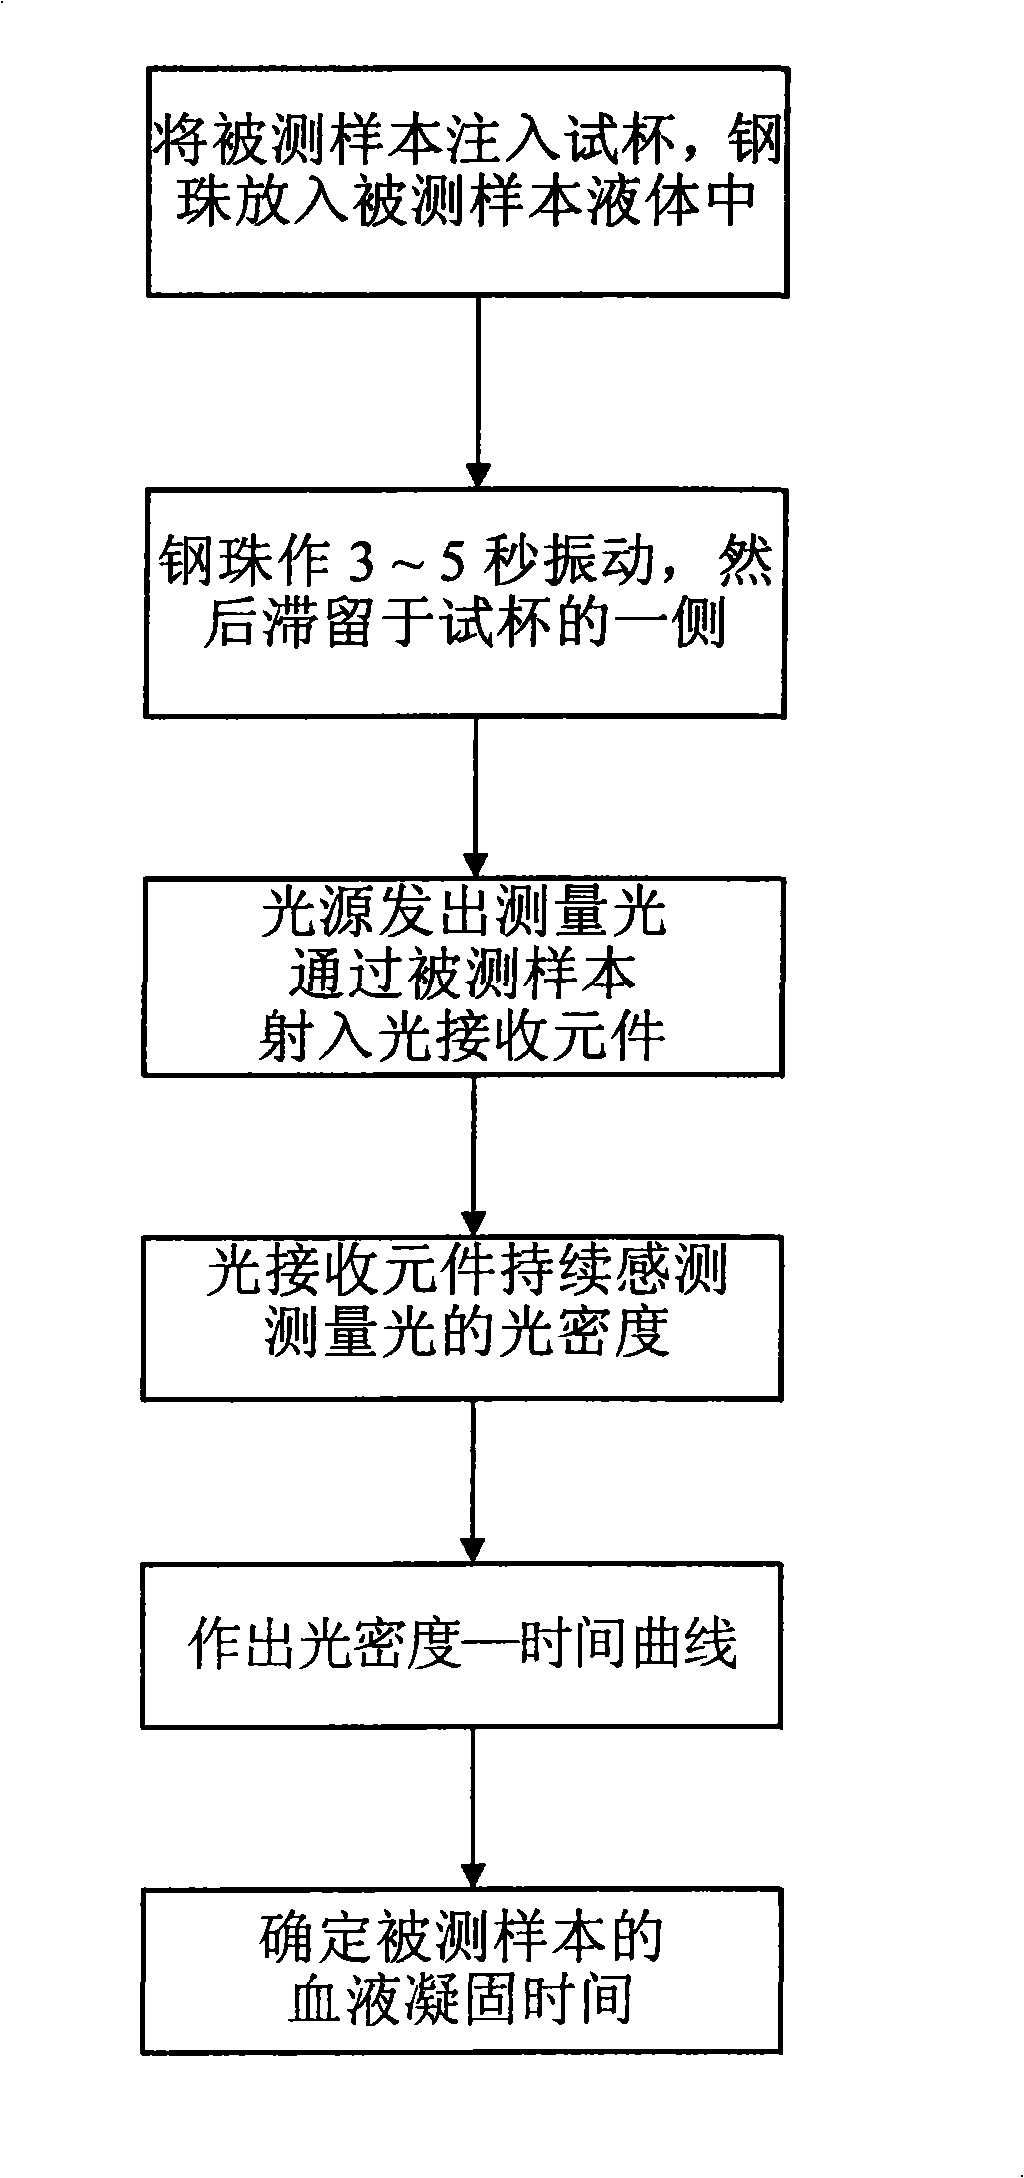 Blood clotting time measurement device and its measurement method